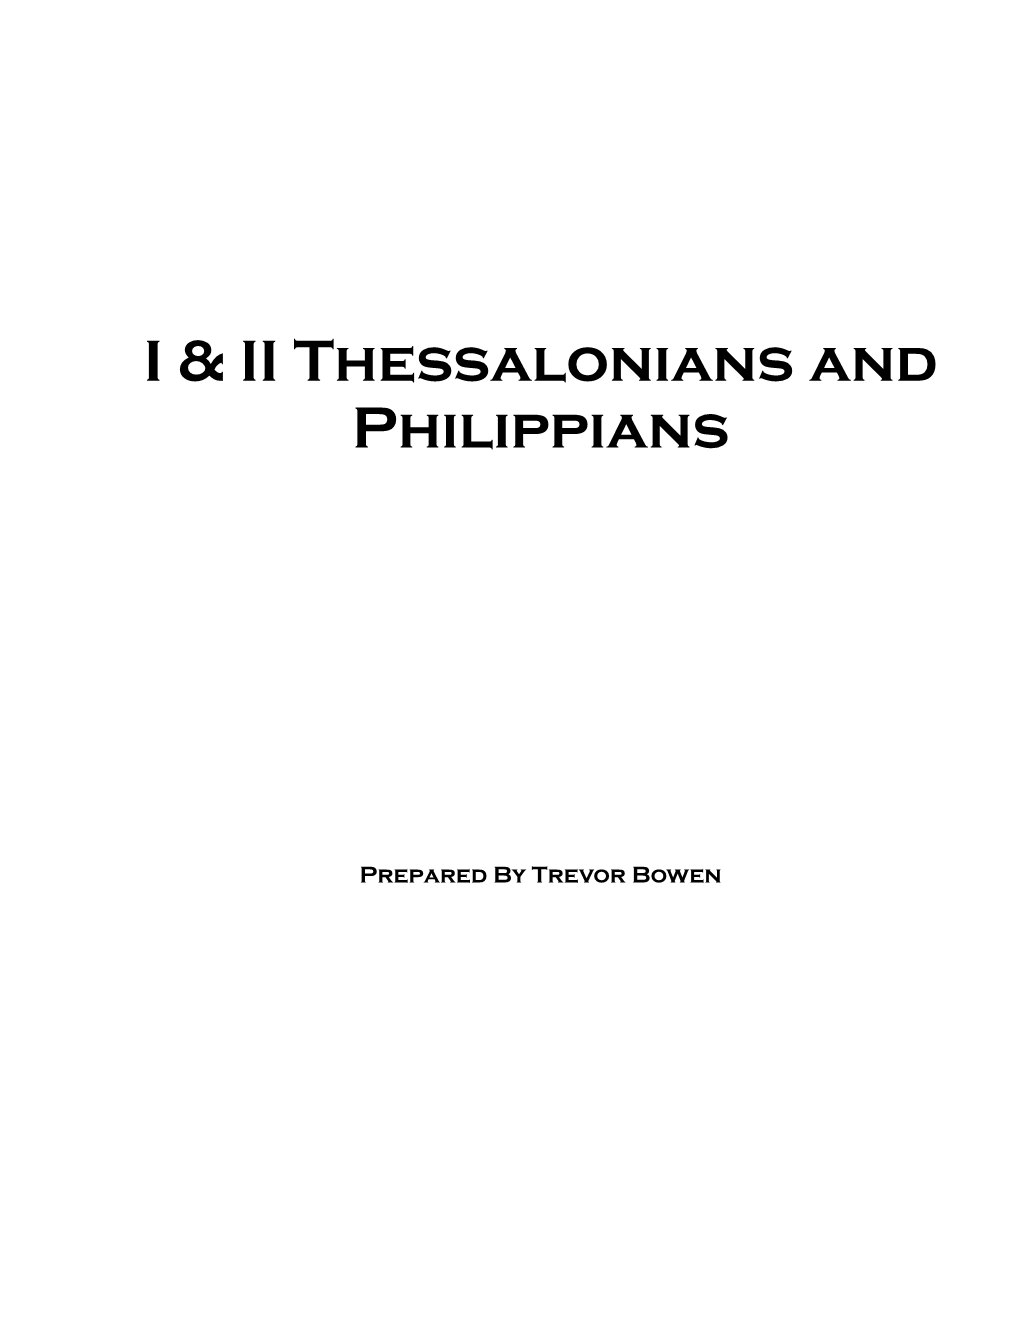 I & II Thessalonians and Philippians